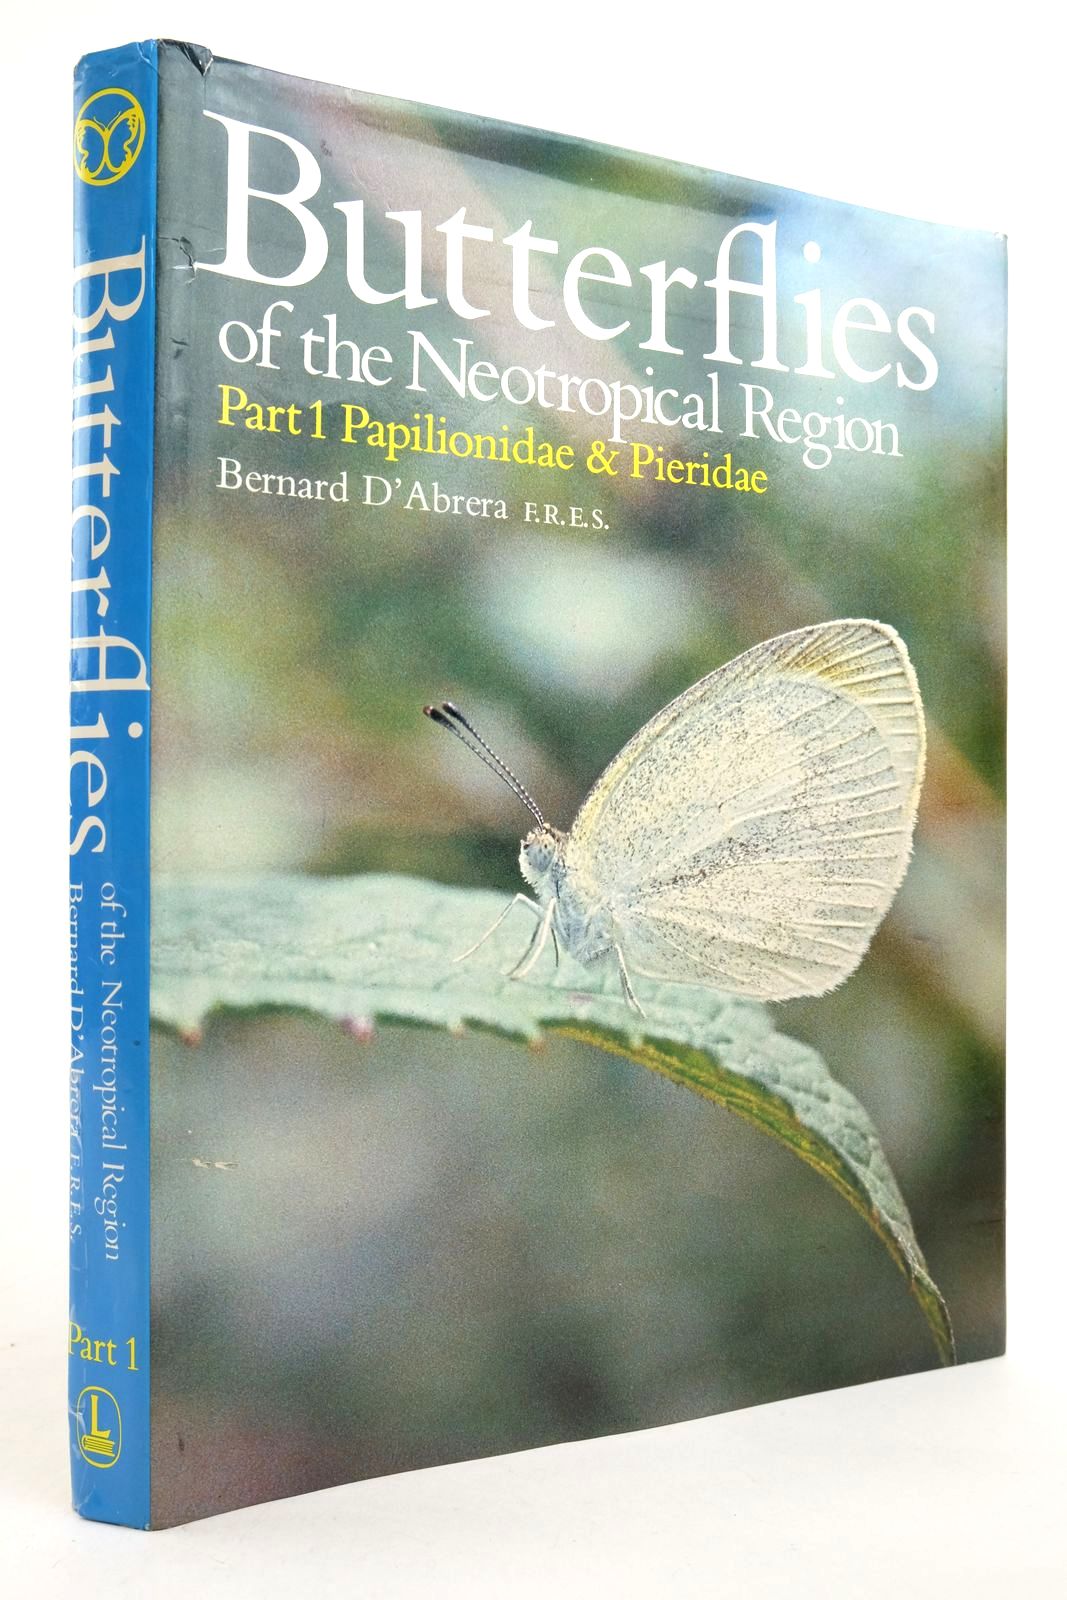 Photo of BUTTERFLIES OF THE NEOTROPICAL REGION PART 1- Stock Number: 2139832